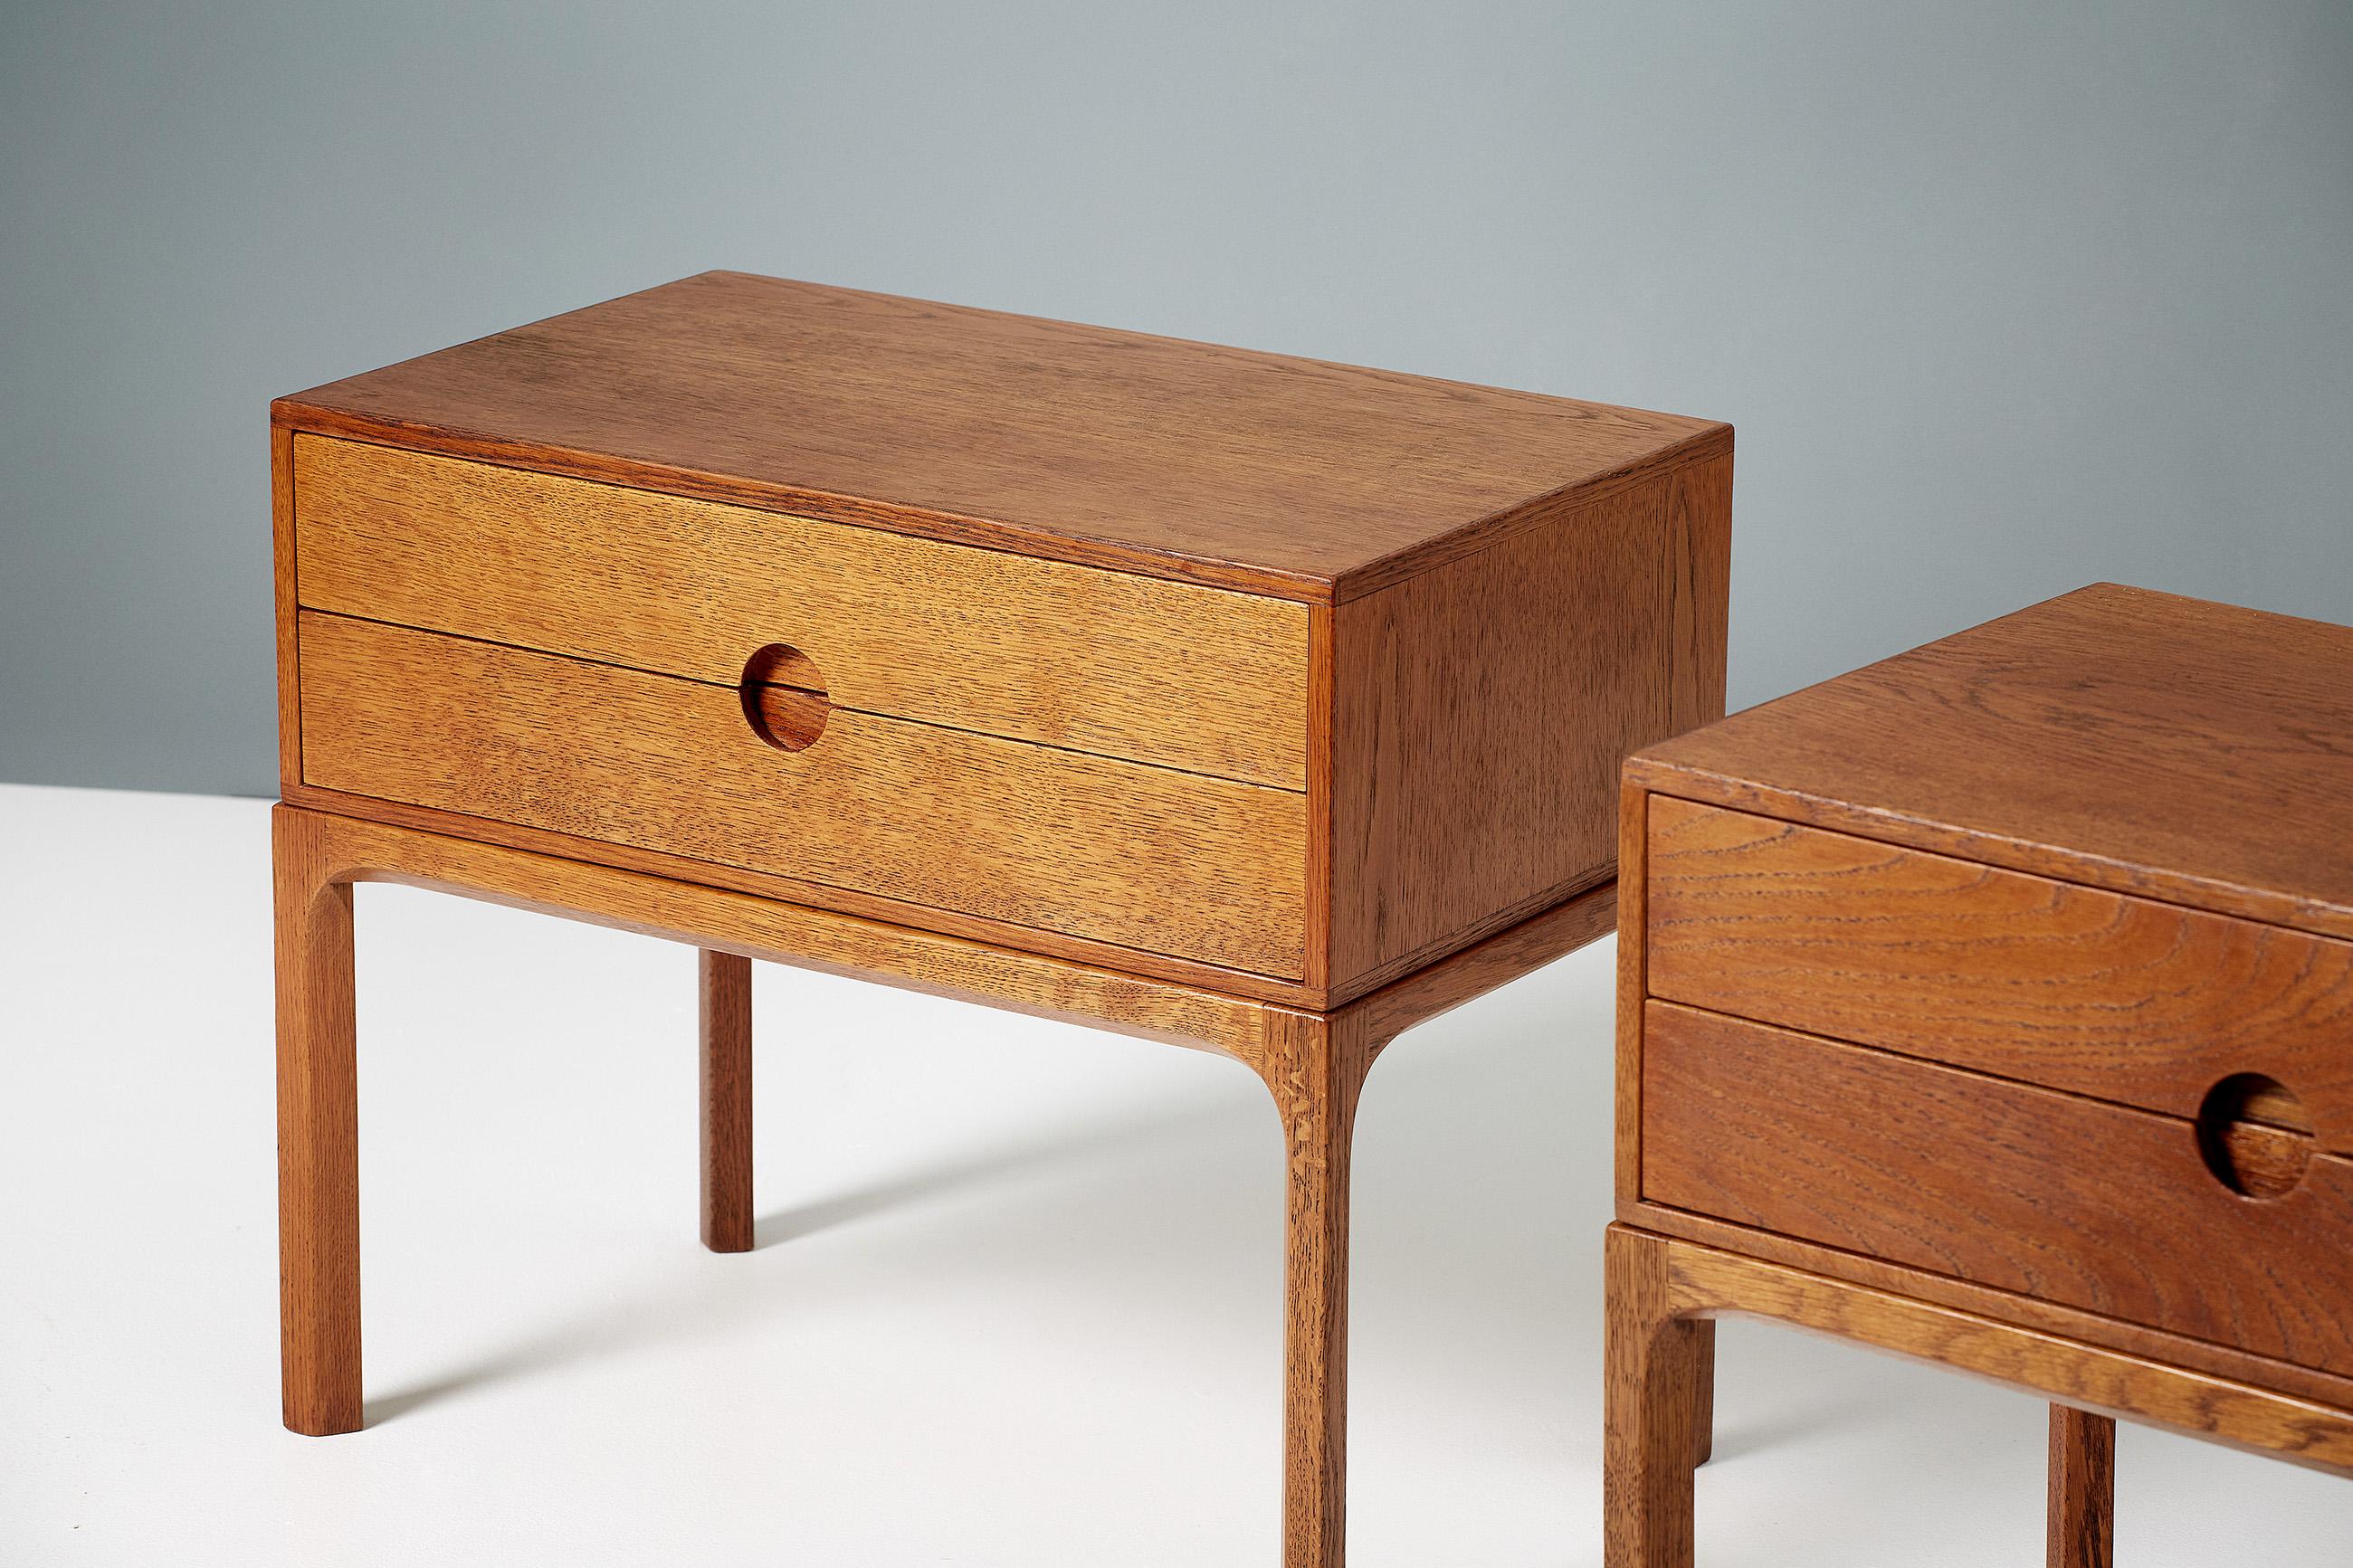 Kai Kristiansen

Bedside cabinets, circa 1960.

Pair of patinated oak bedside cabinets, produced by cabinetmaker Aksel Kjaersgaard in Odder, Denmark, circa 1960. 

Each cabinet has 2 drawers with Kristiansen's trademark circular drawer pull to